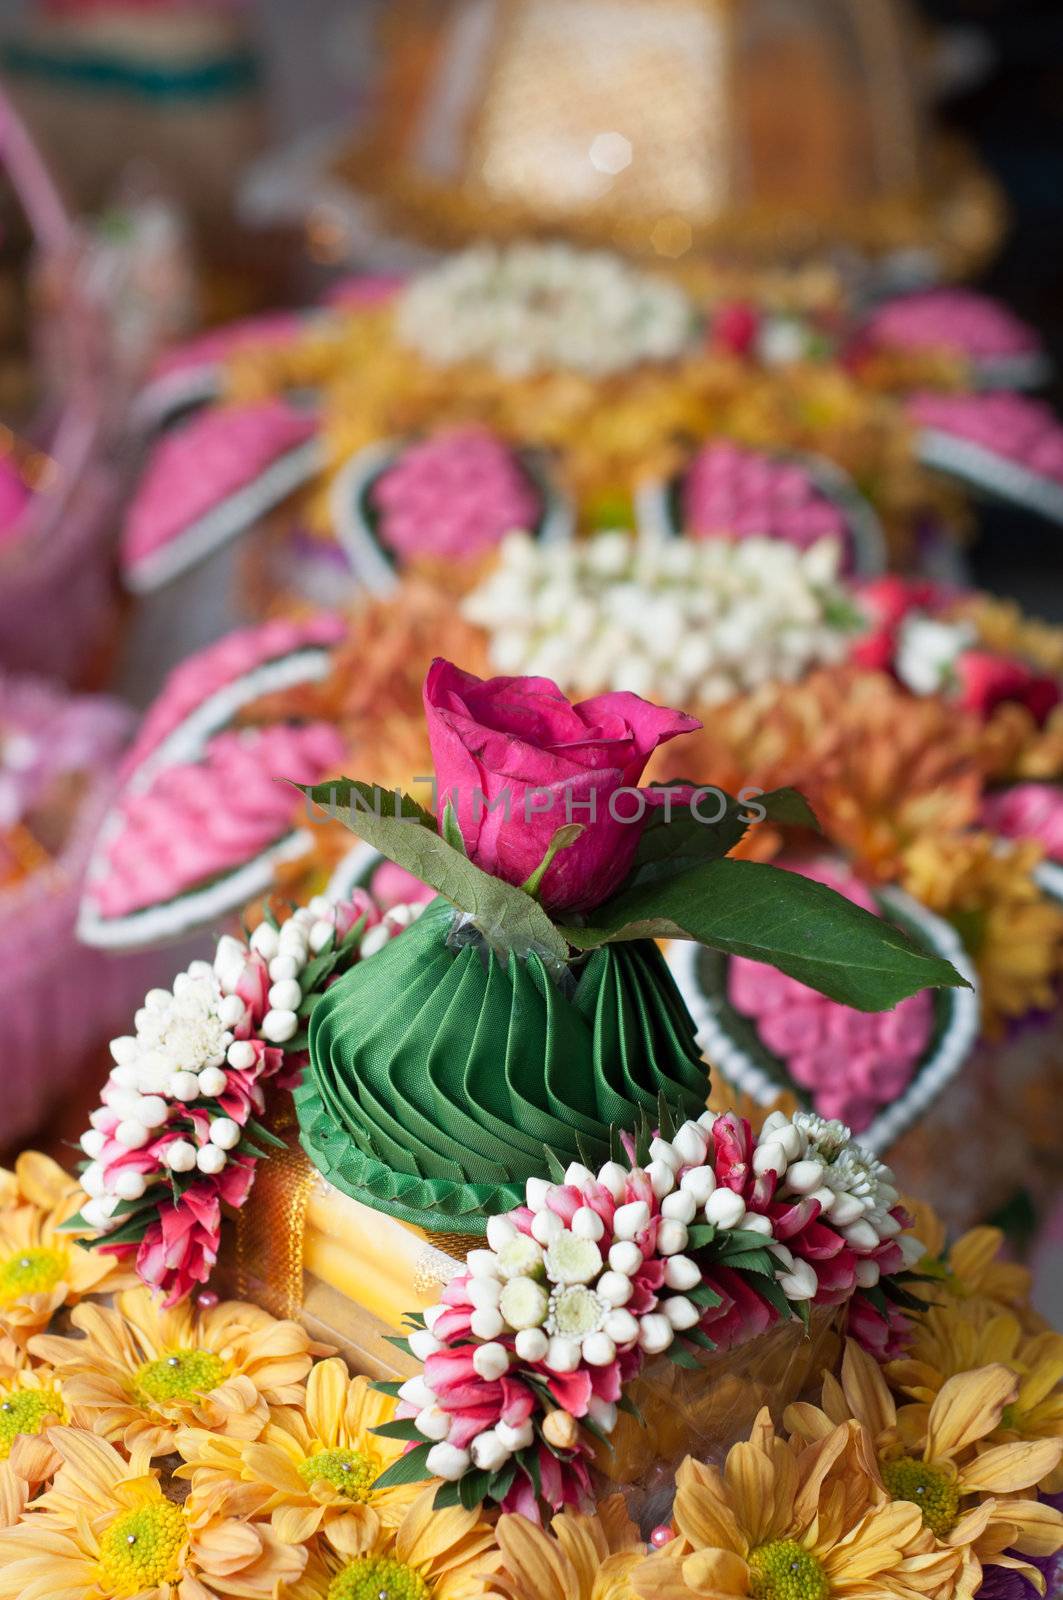 rose and candle for thai wedding ceremony buddhism culture